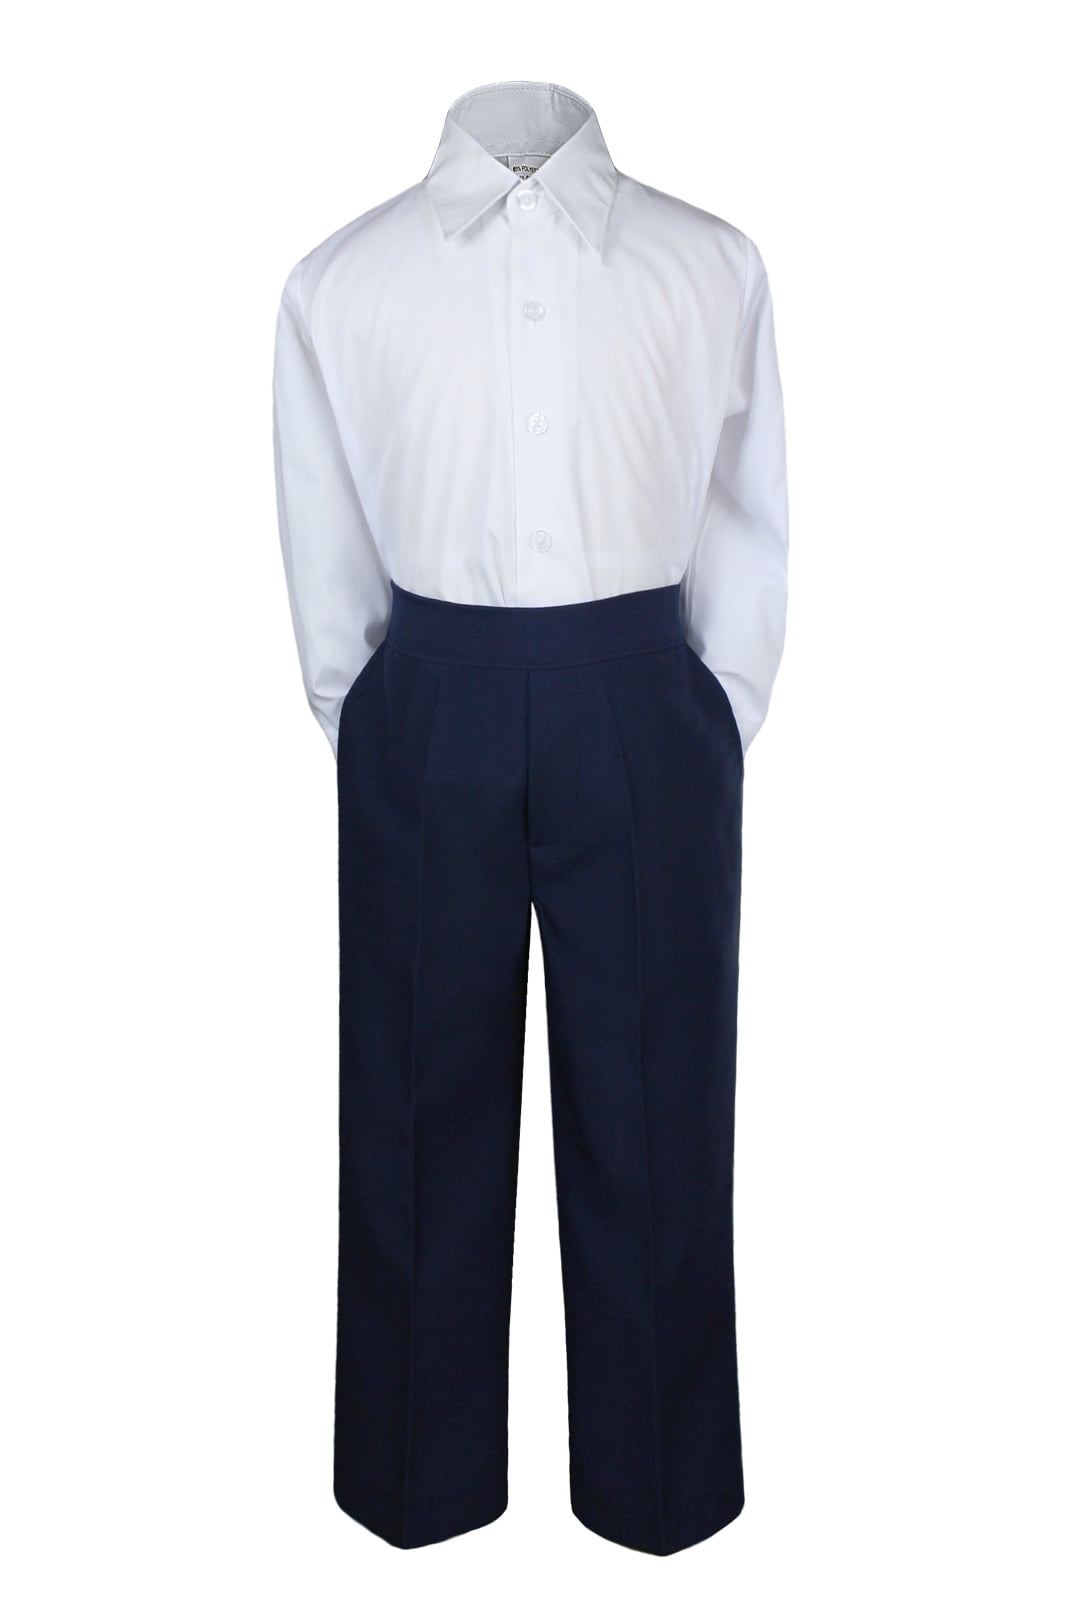 Formal Party Wear Pant Shirt Clearance ...